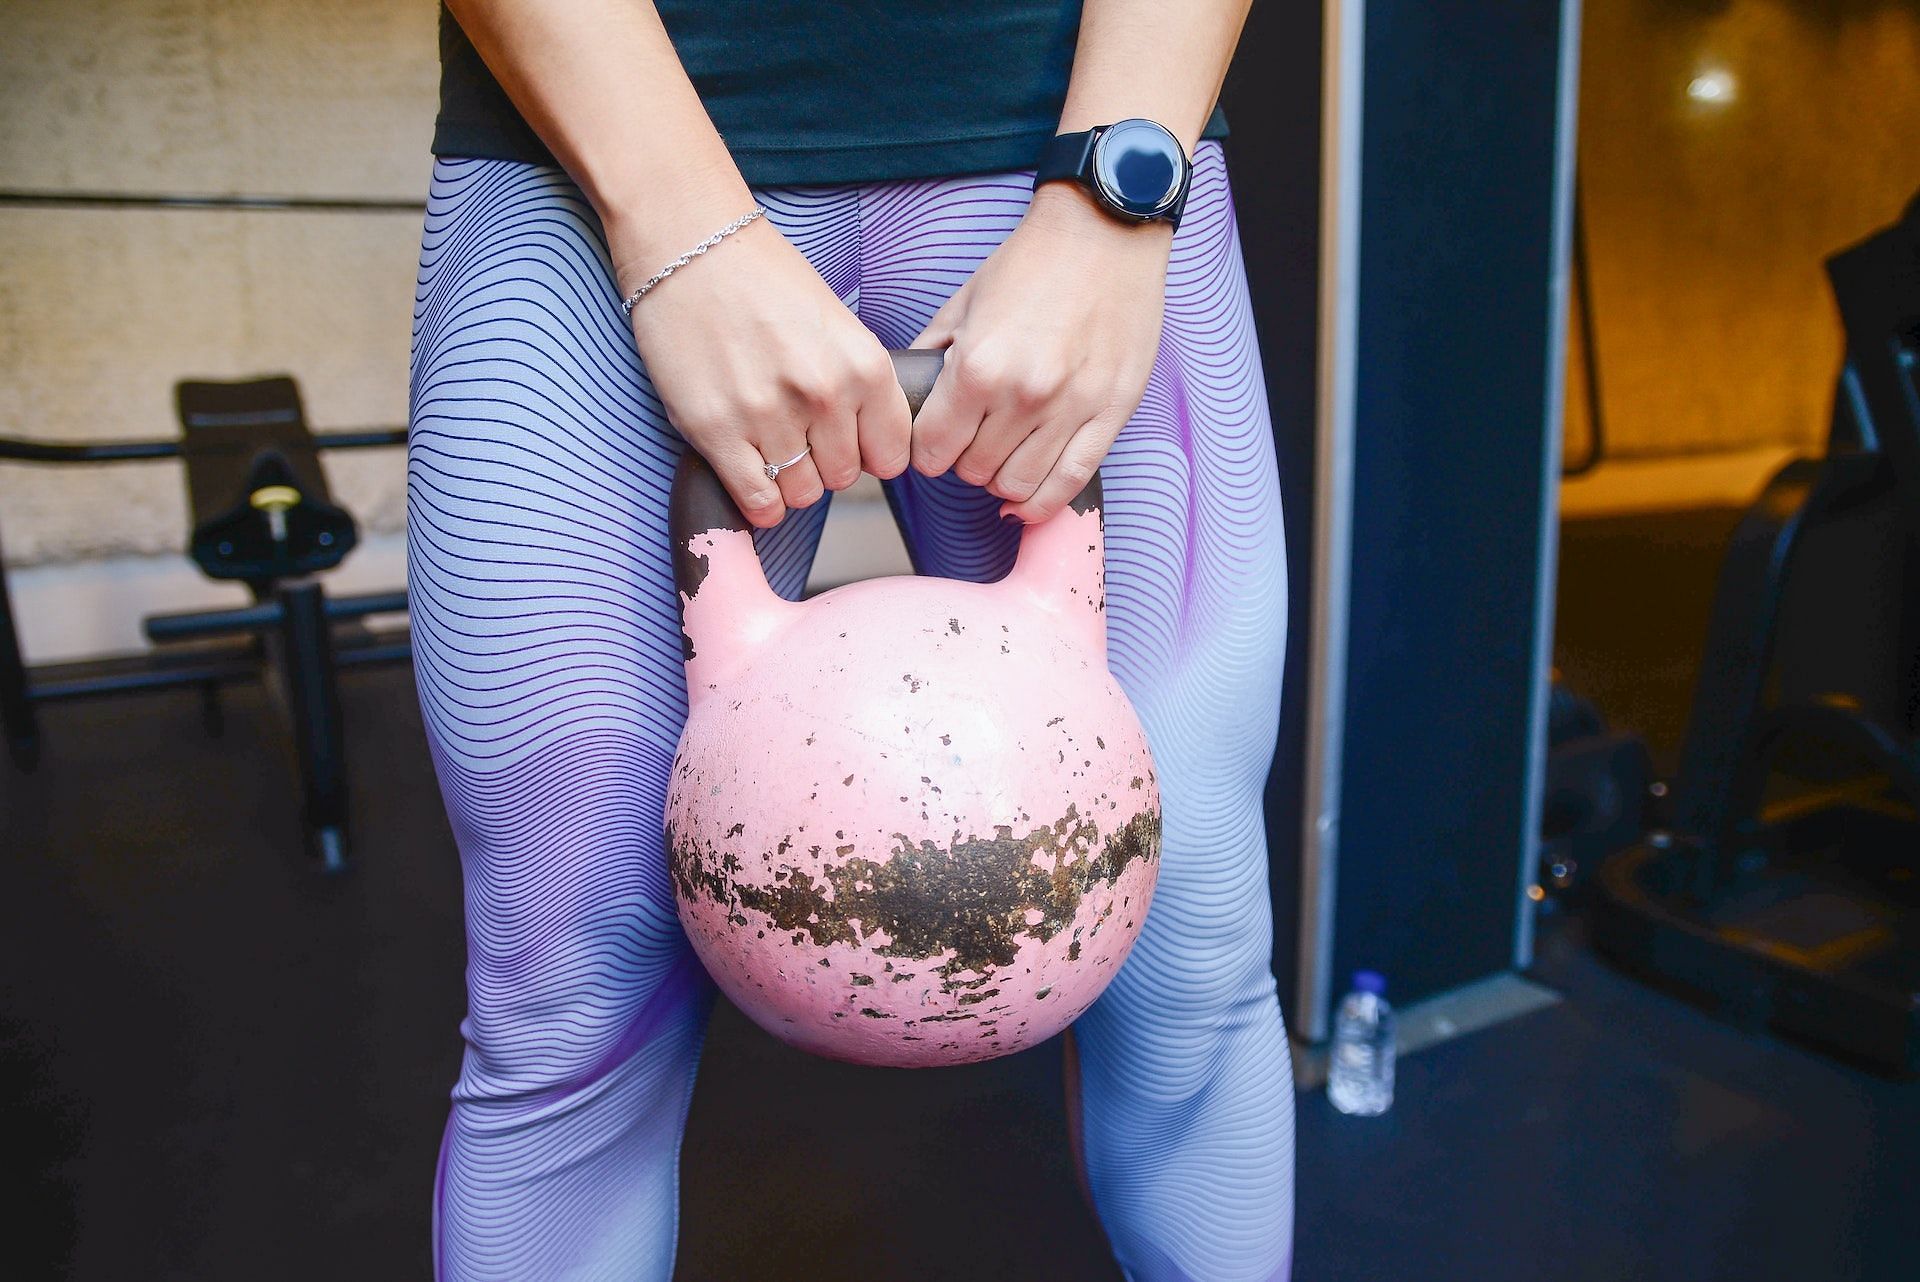 A kettlebell swing targets major muscles in the body. (Photo via Pexels/Kampus Production)